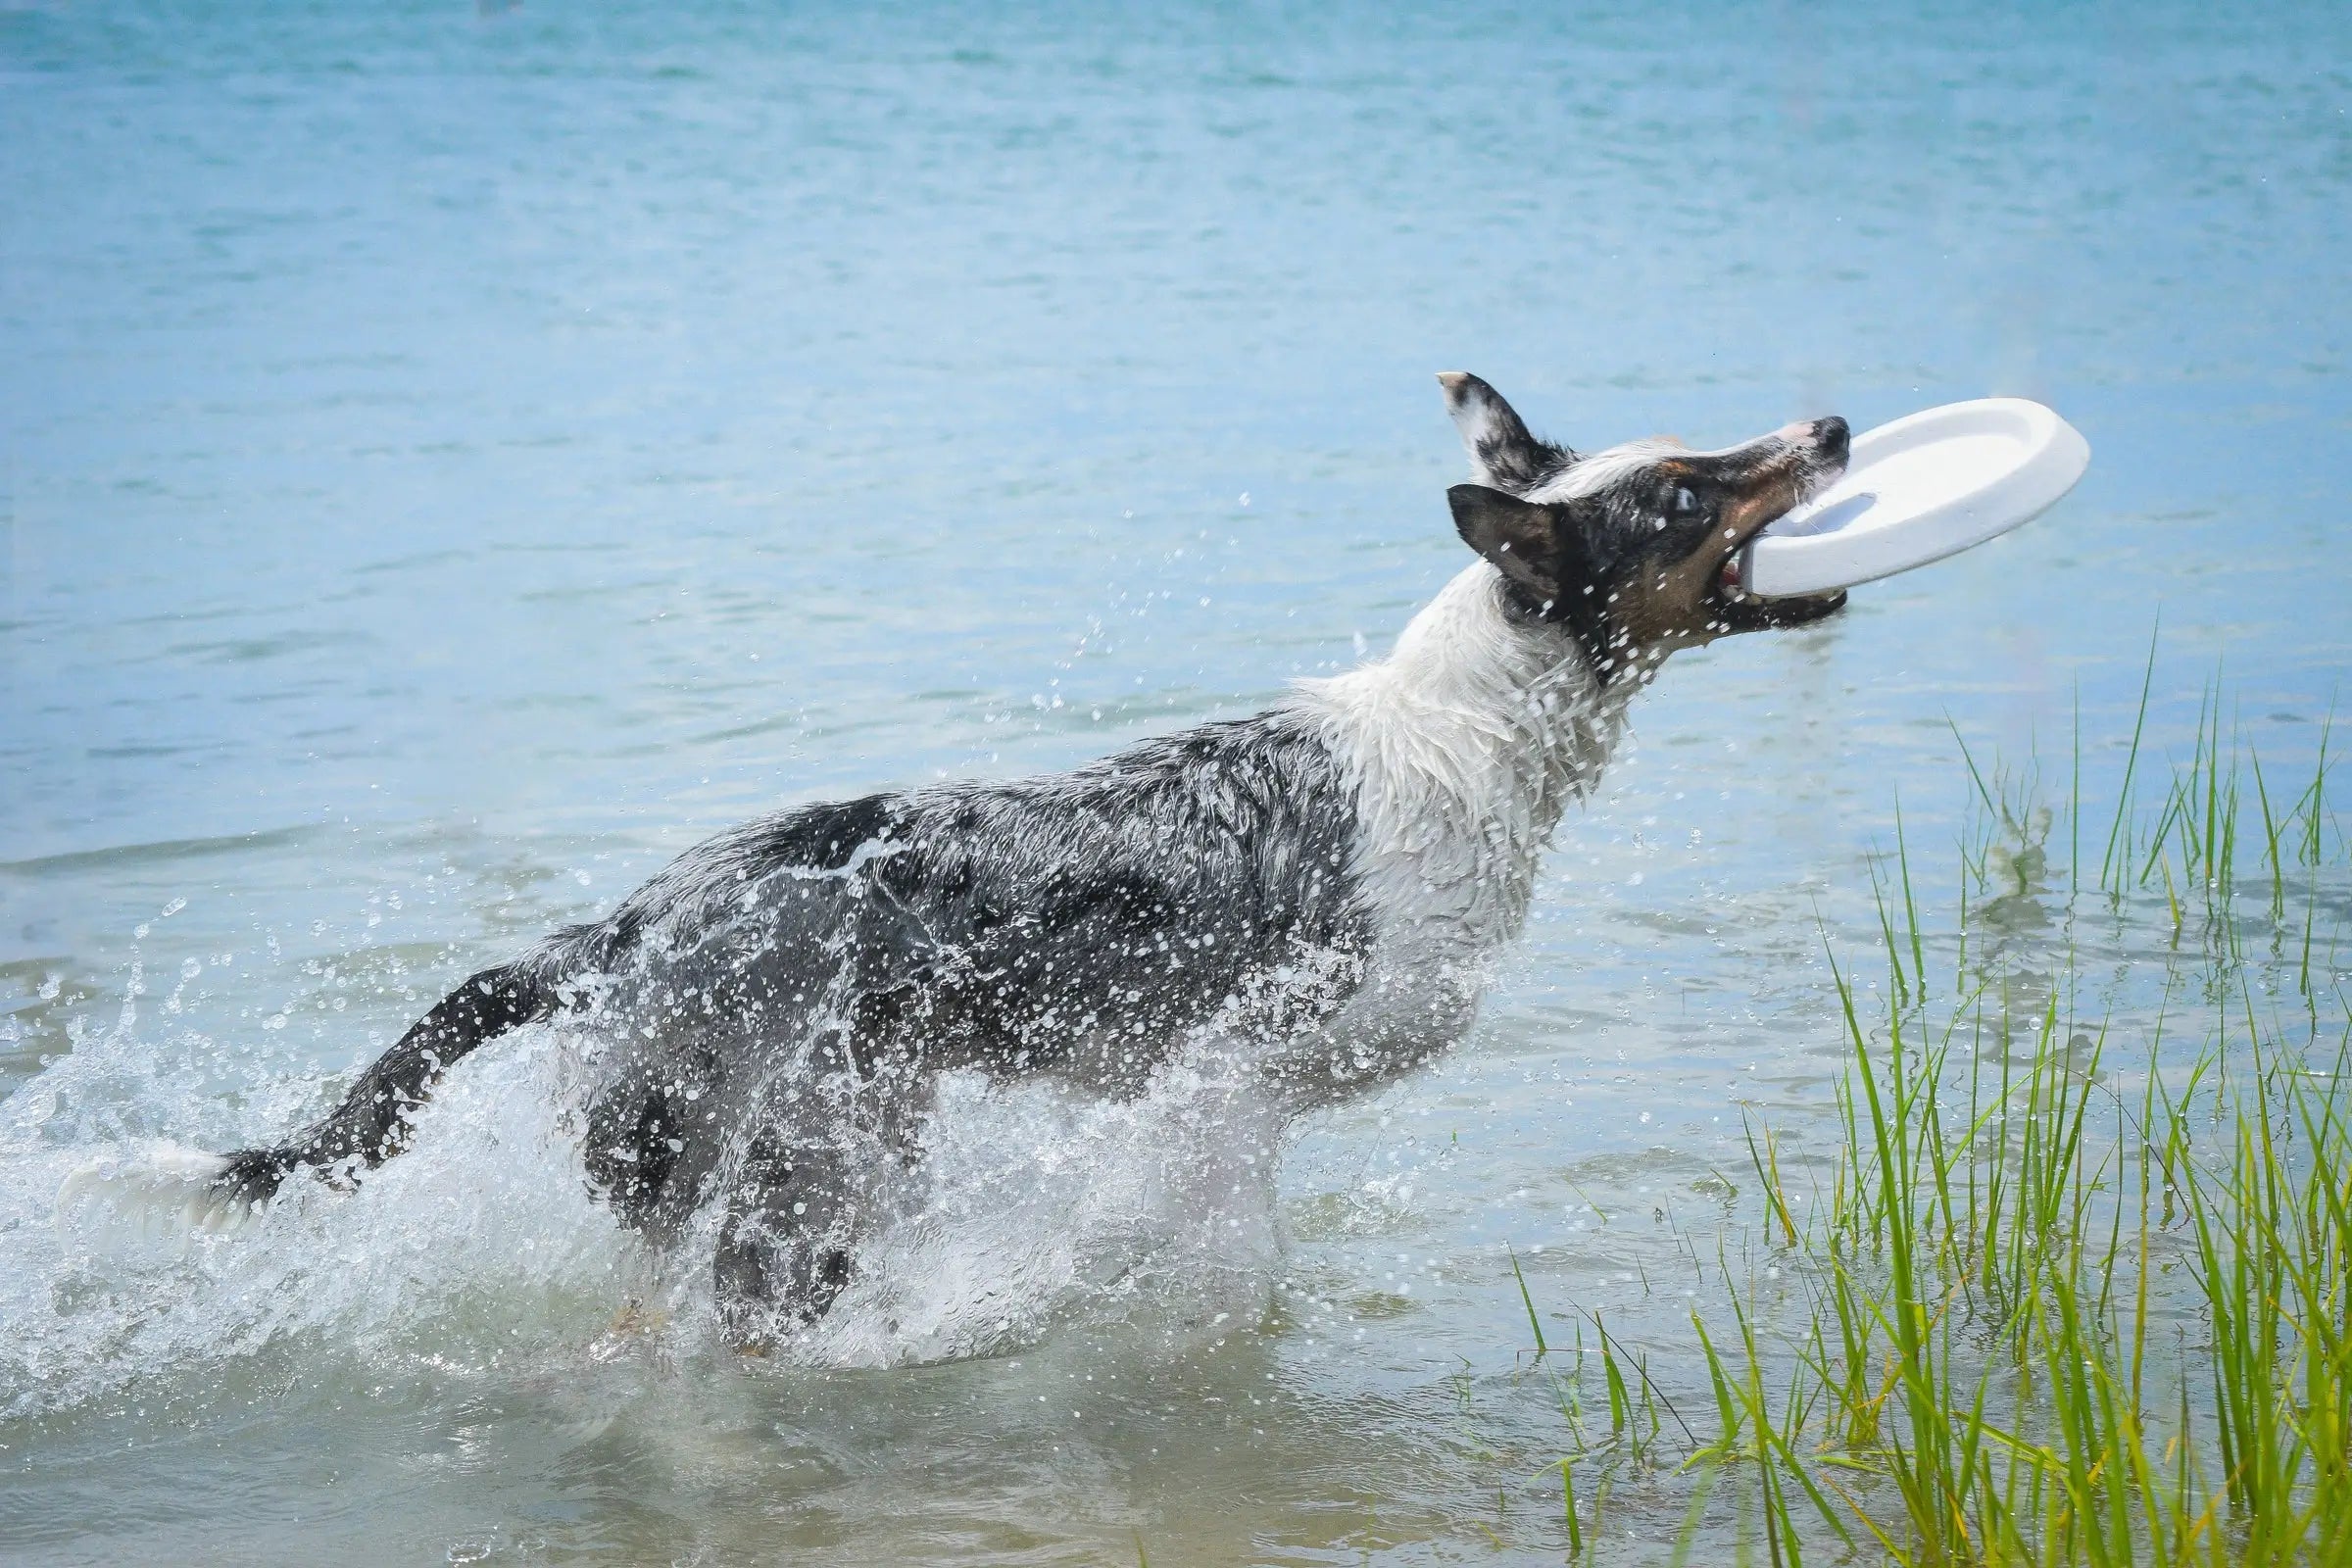 Border Collie jumping out of the water to catch a Bluewater Dog white frisbee in the air.